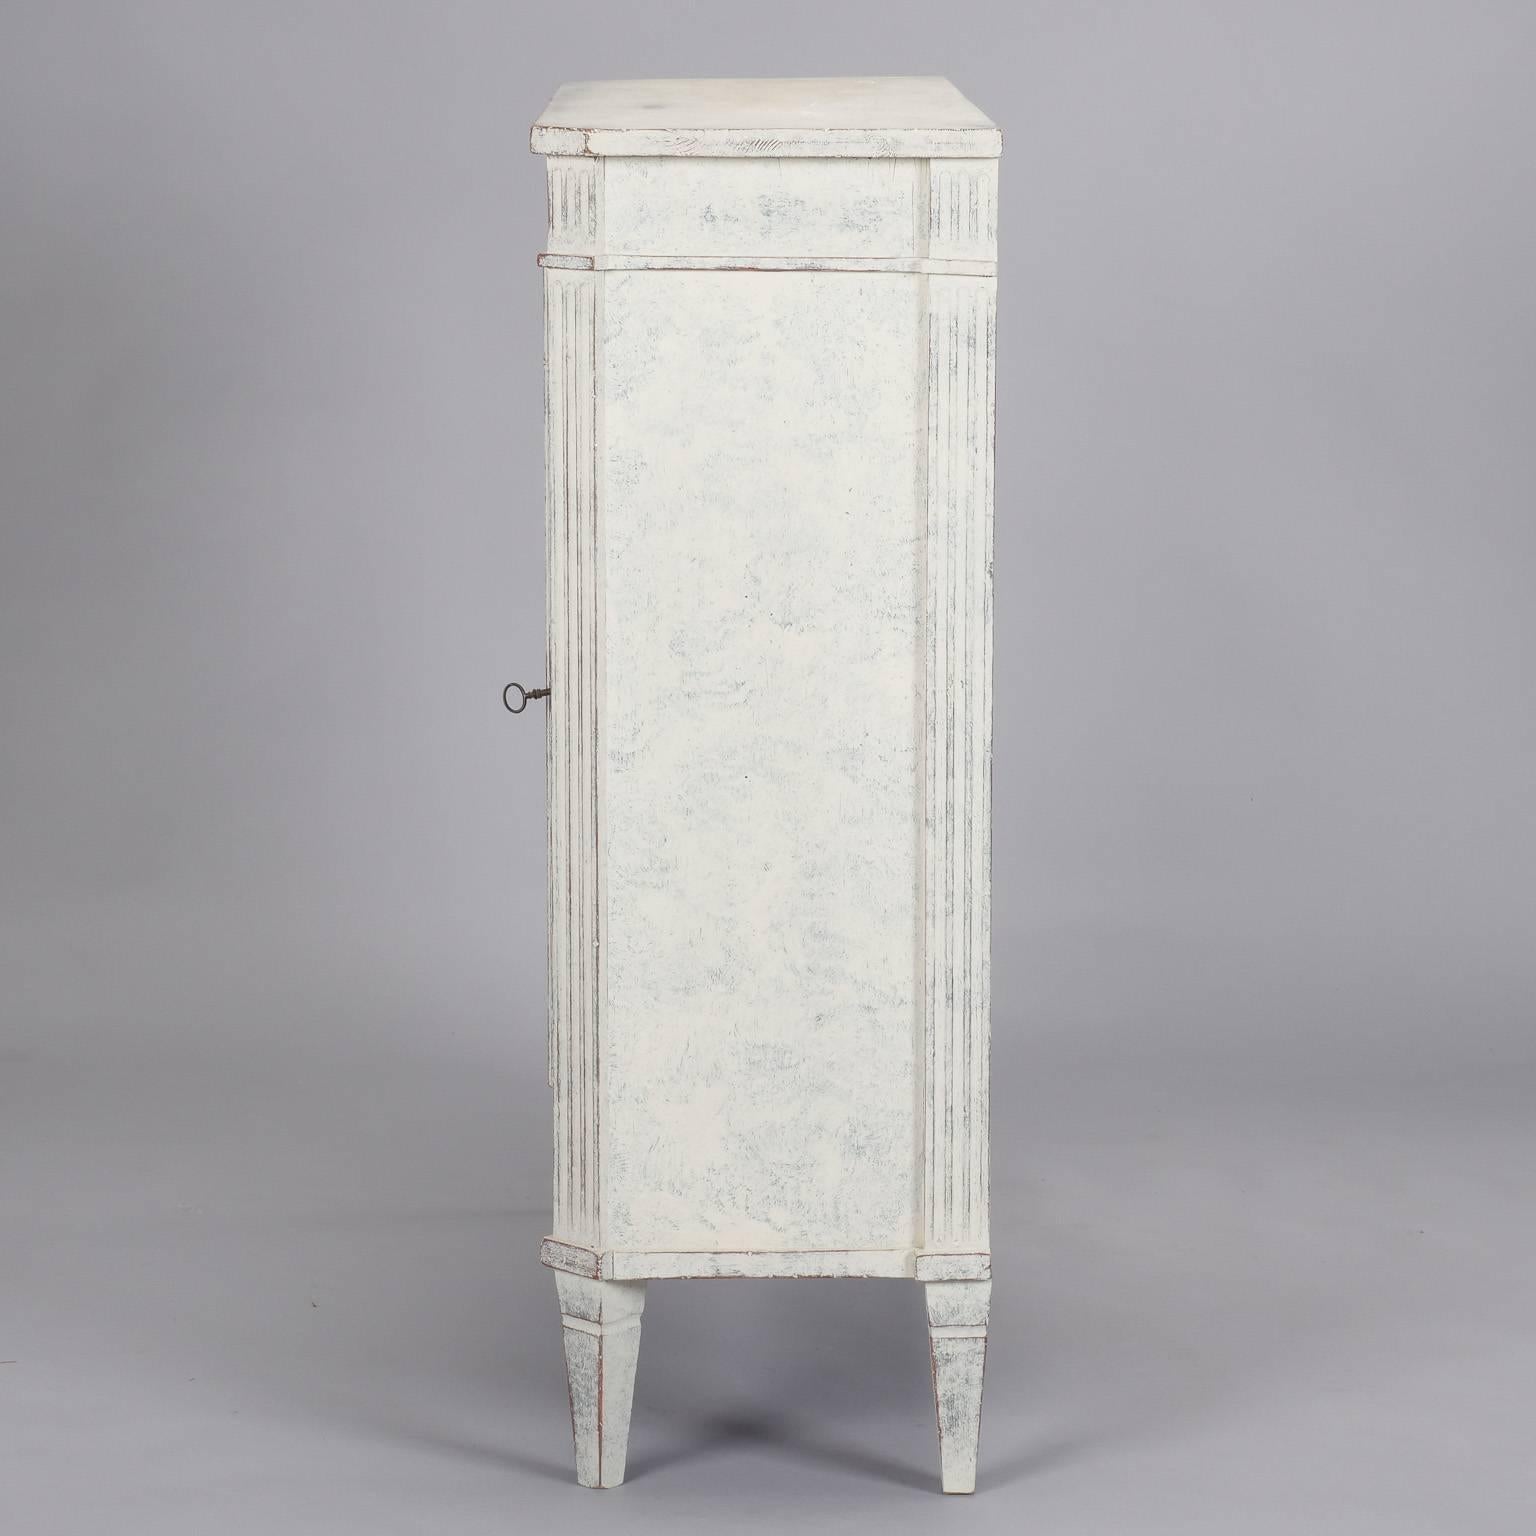 French shallow two-door cabinet has new side rails and painted finish in creamy white with blue gray undertones, circa 1900. Reeded legs, decorative carved details on apron and sides, working skeleton key. Two internal shelves.